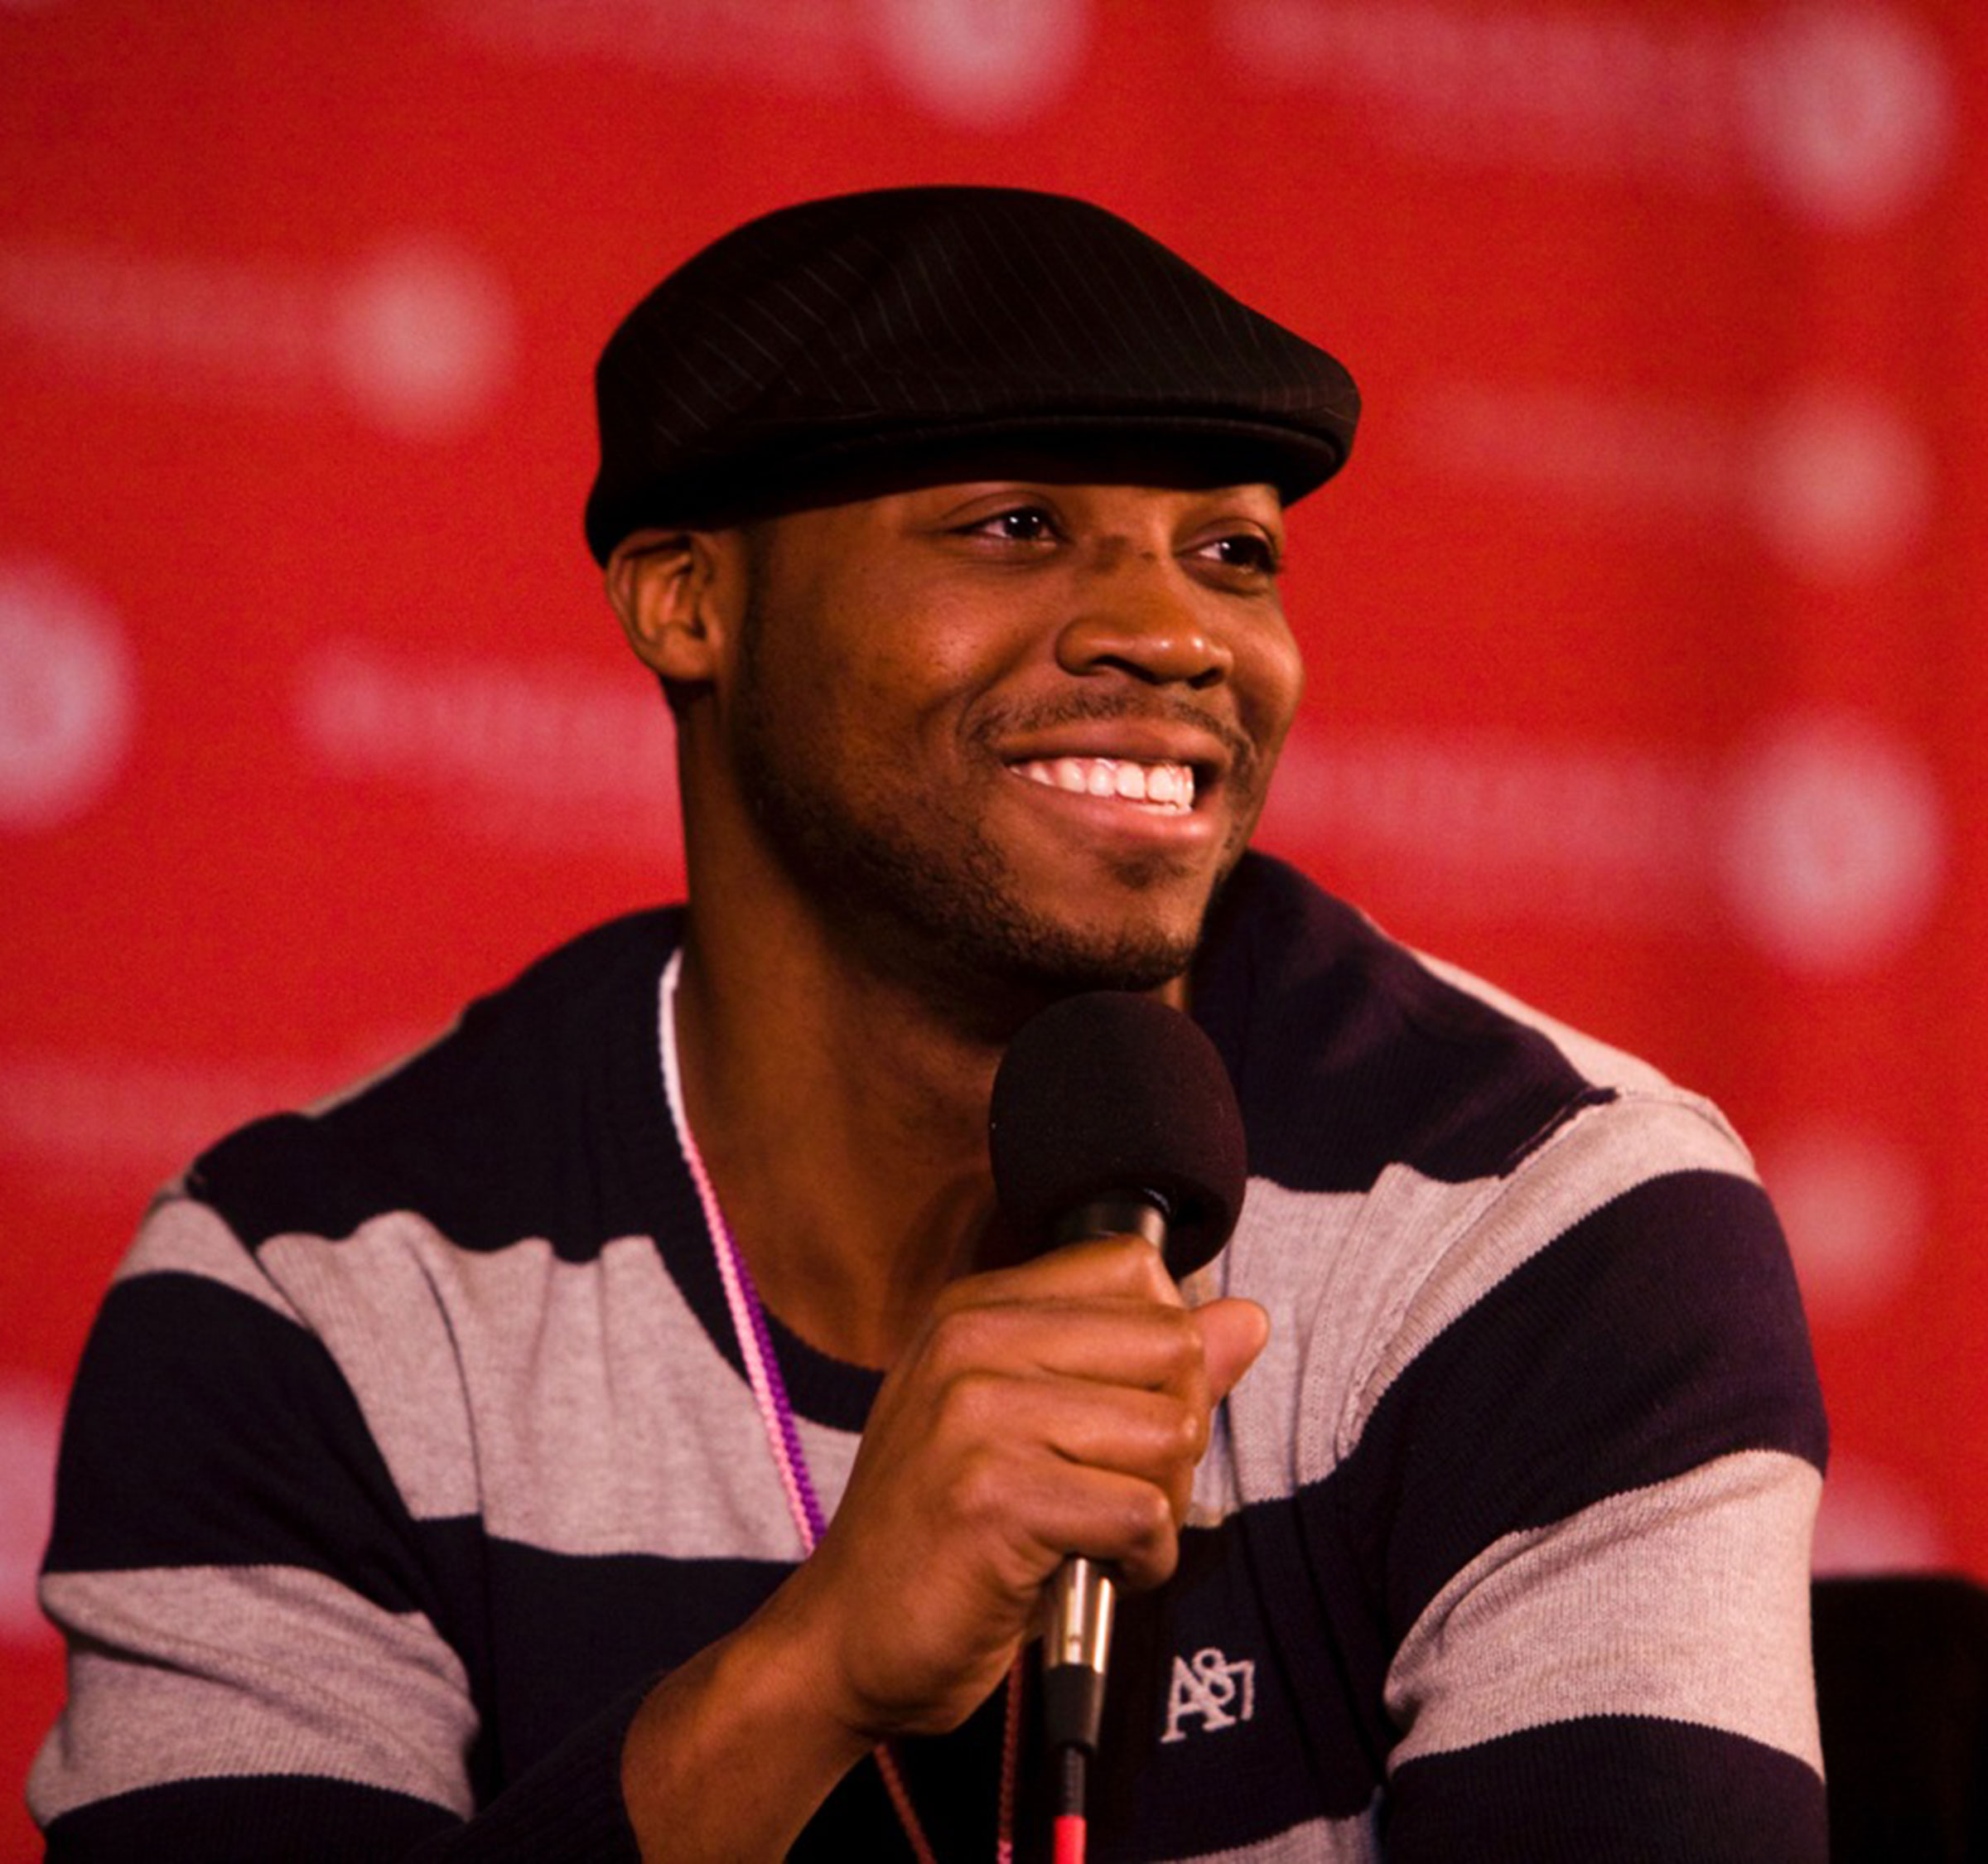  speaks into a microphone while smiling on a film festival stage